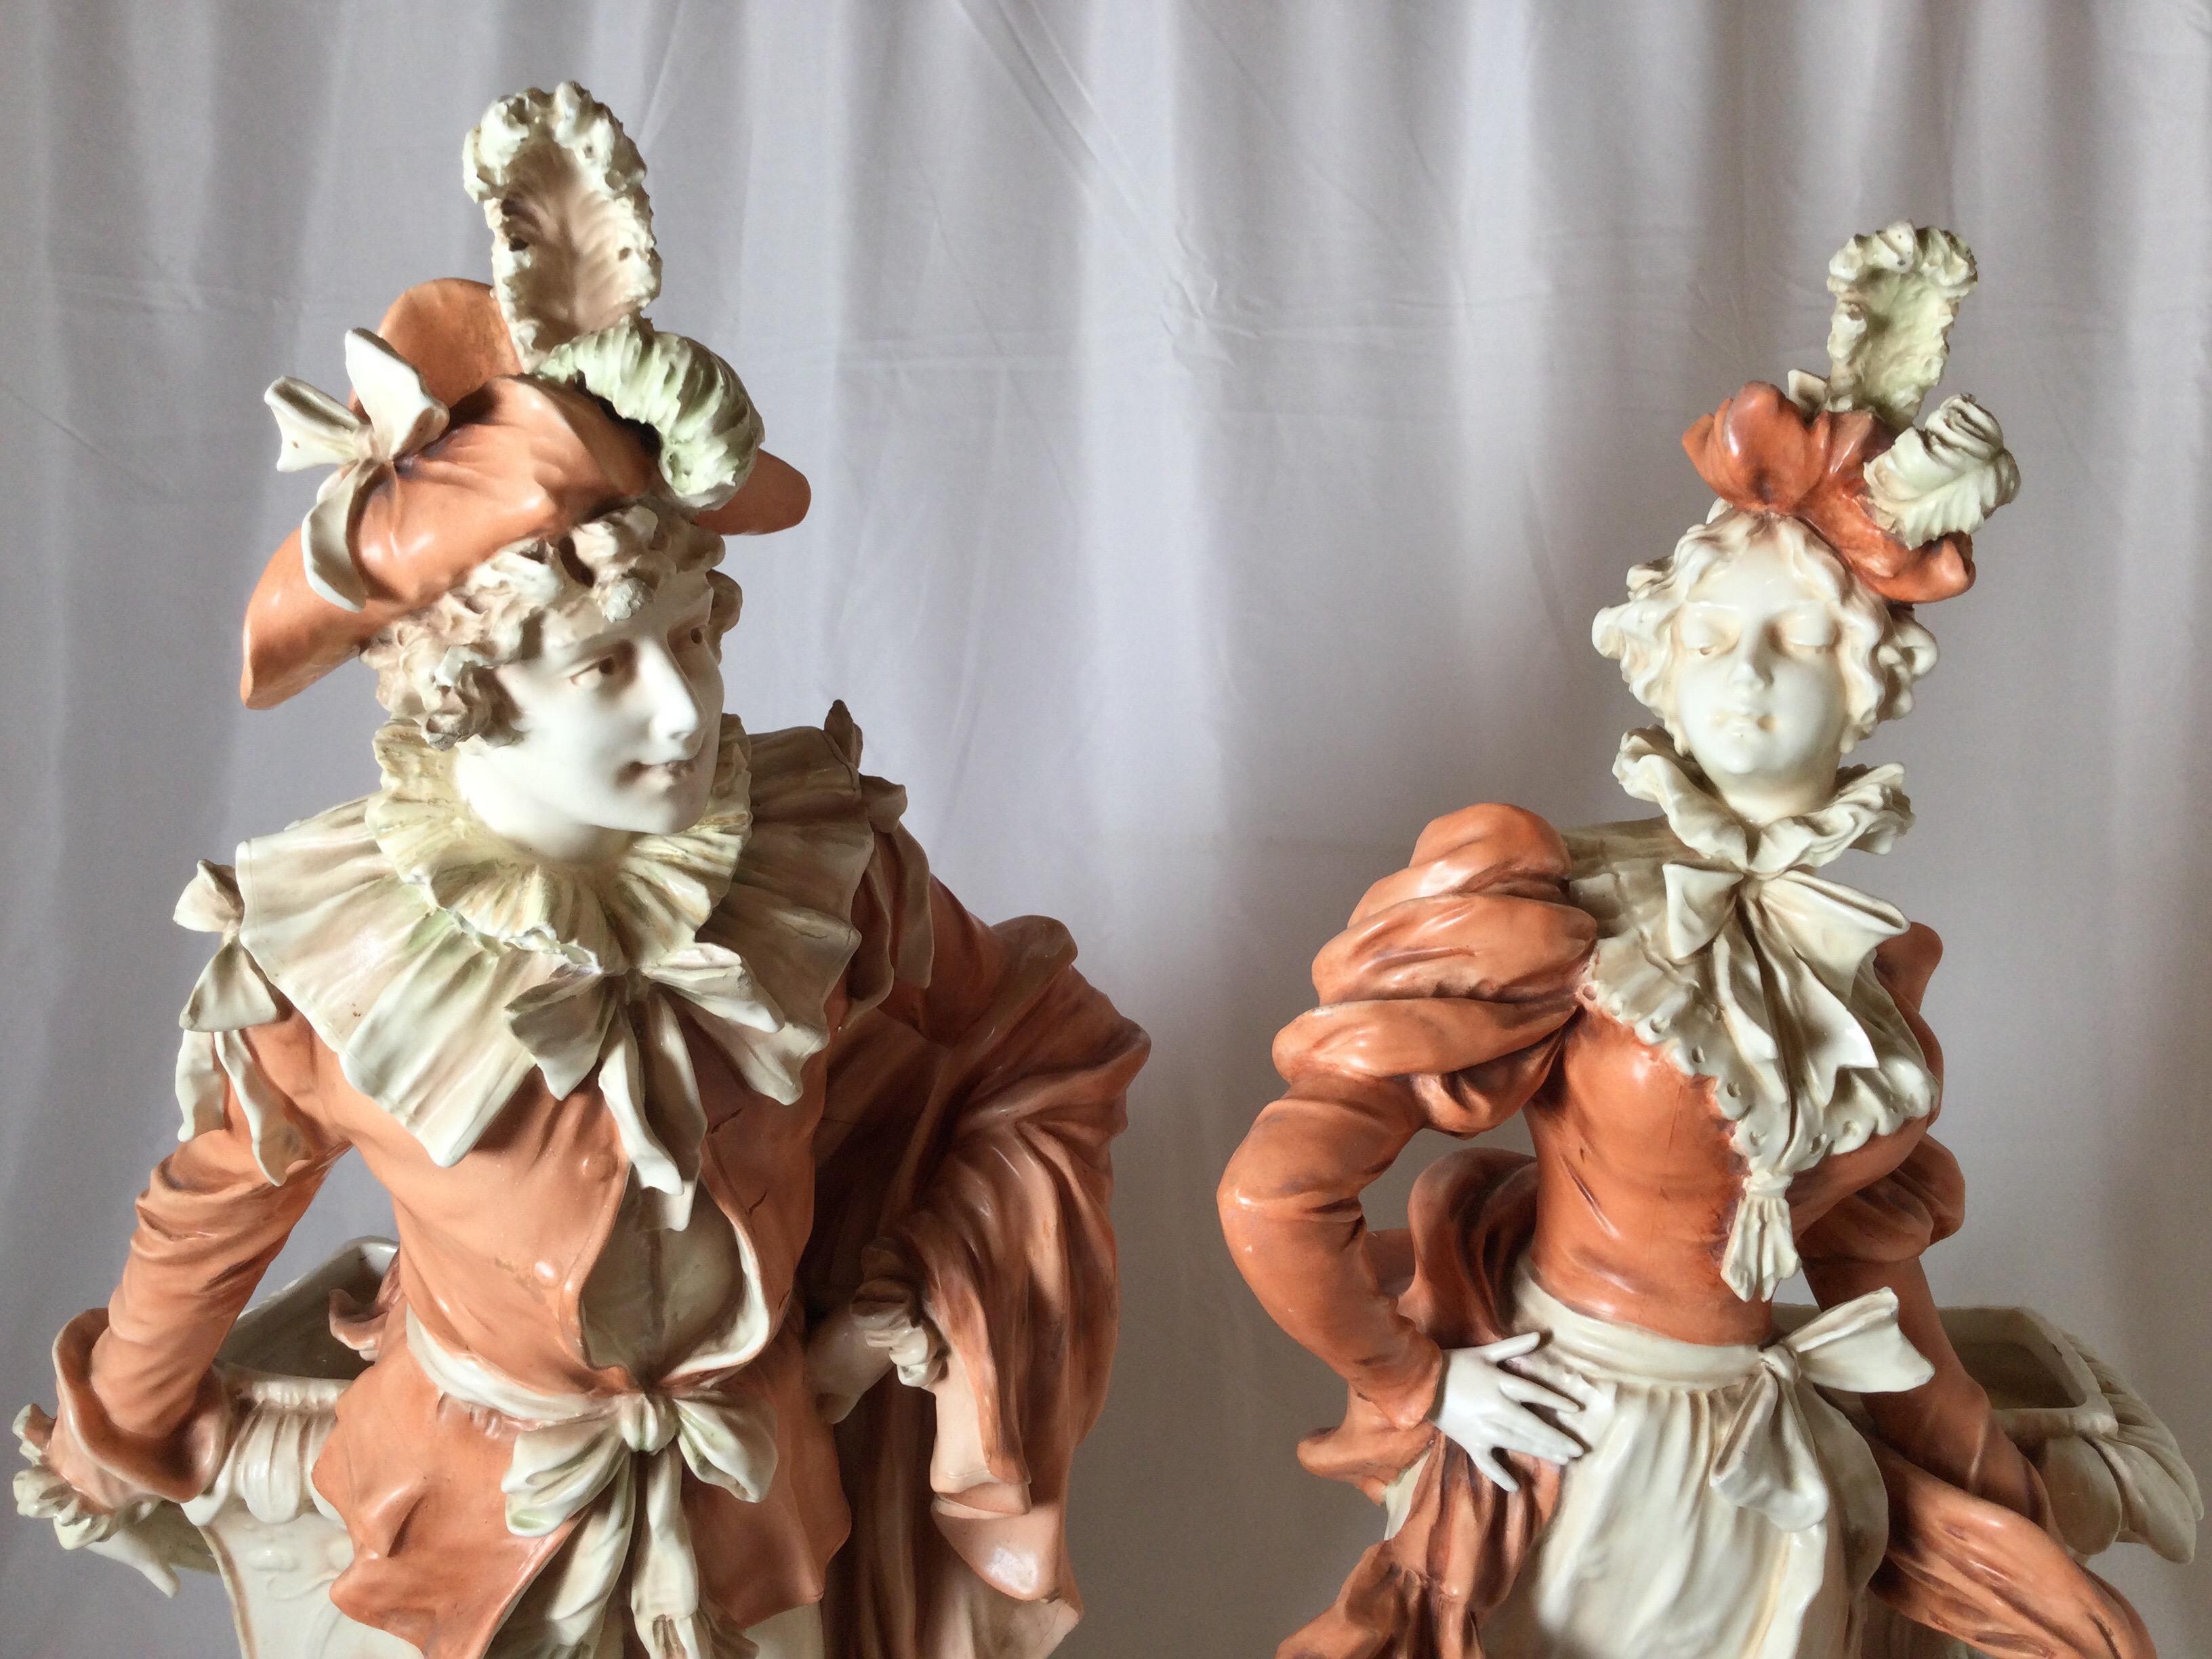 Pair of French Art Nouveau porcelain large figural vases. Very impressive size standing 31 1/2